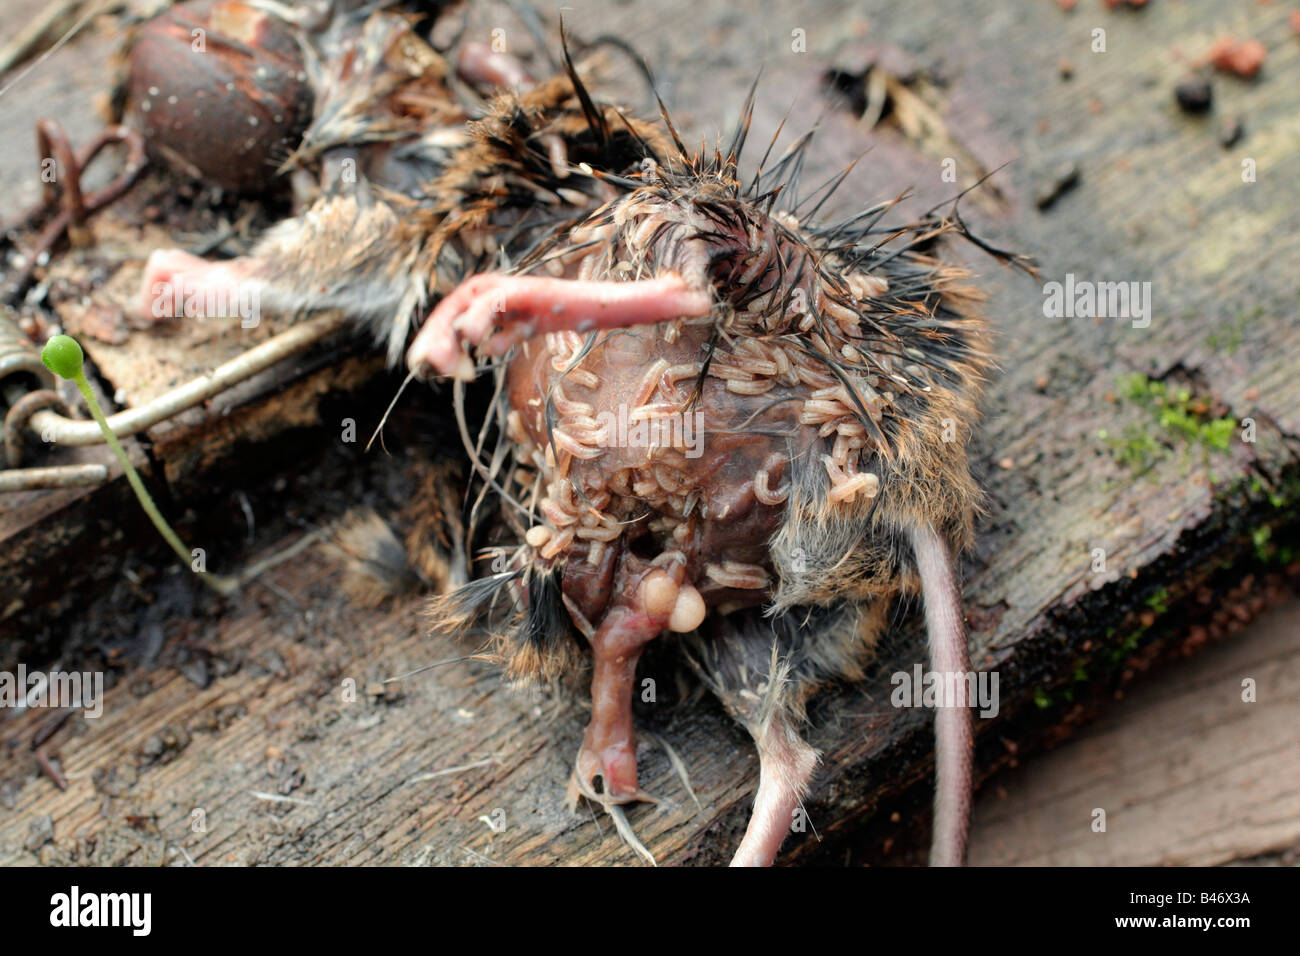 A FIELD MOUSE CARCASS BEING CONSUMED BY FLY MAGGOTS Stock Photo